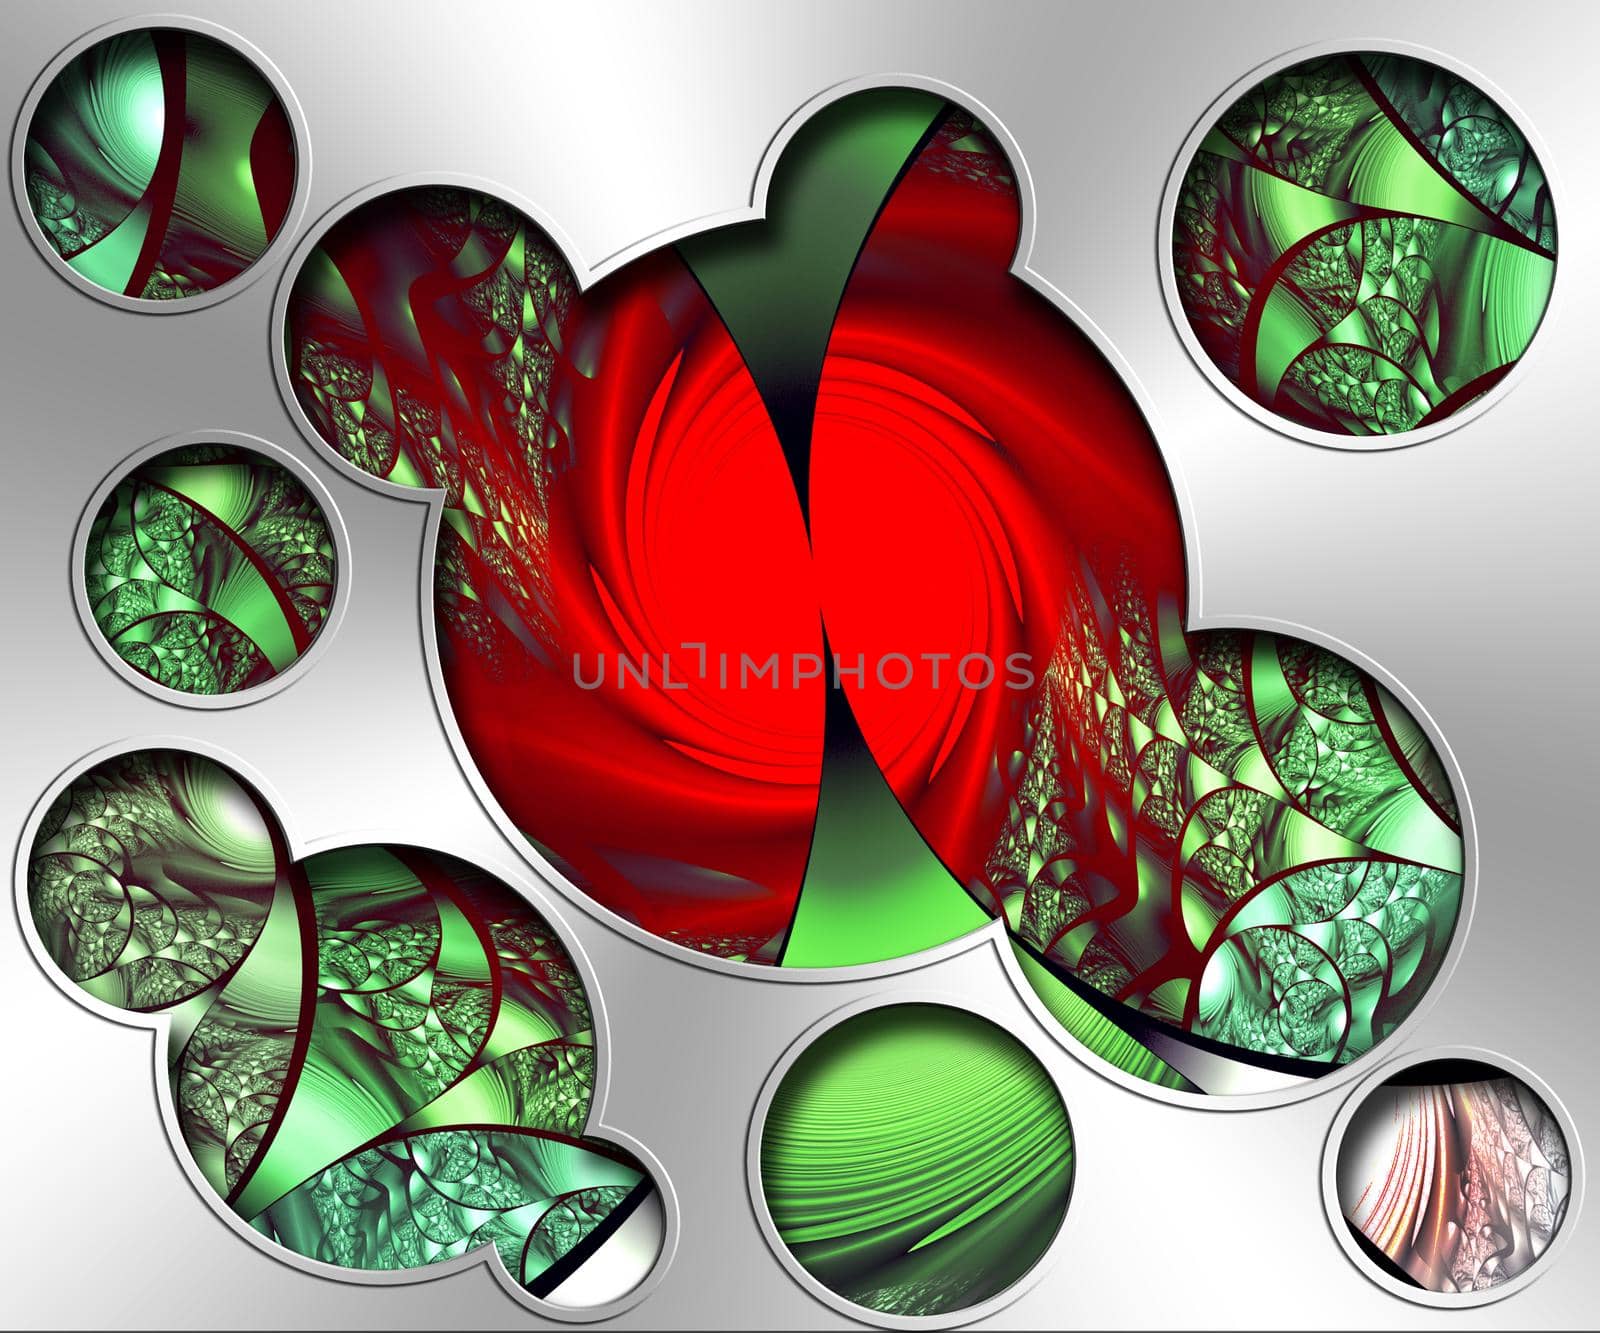 3D illustration of creative fractal artwork combined with silver metal plate embellishment